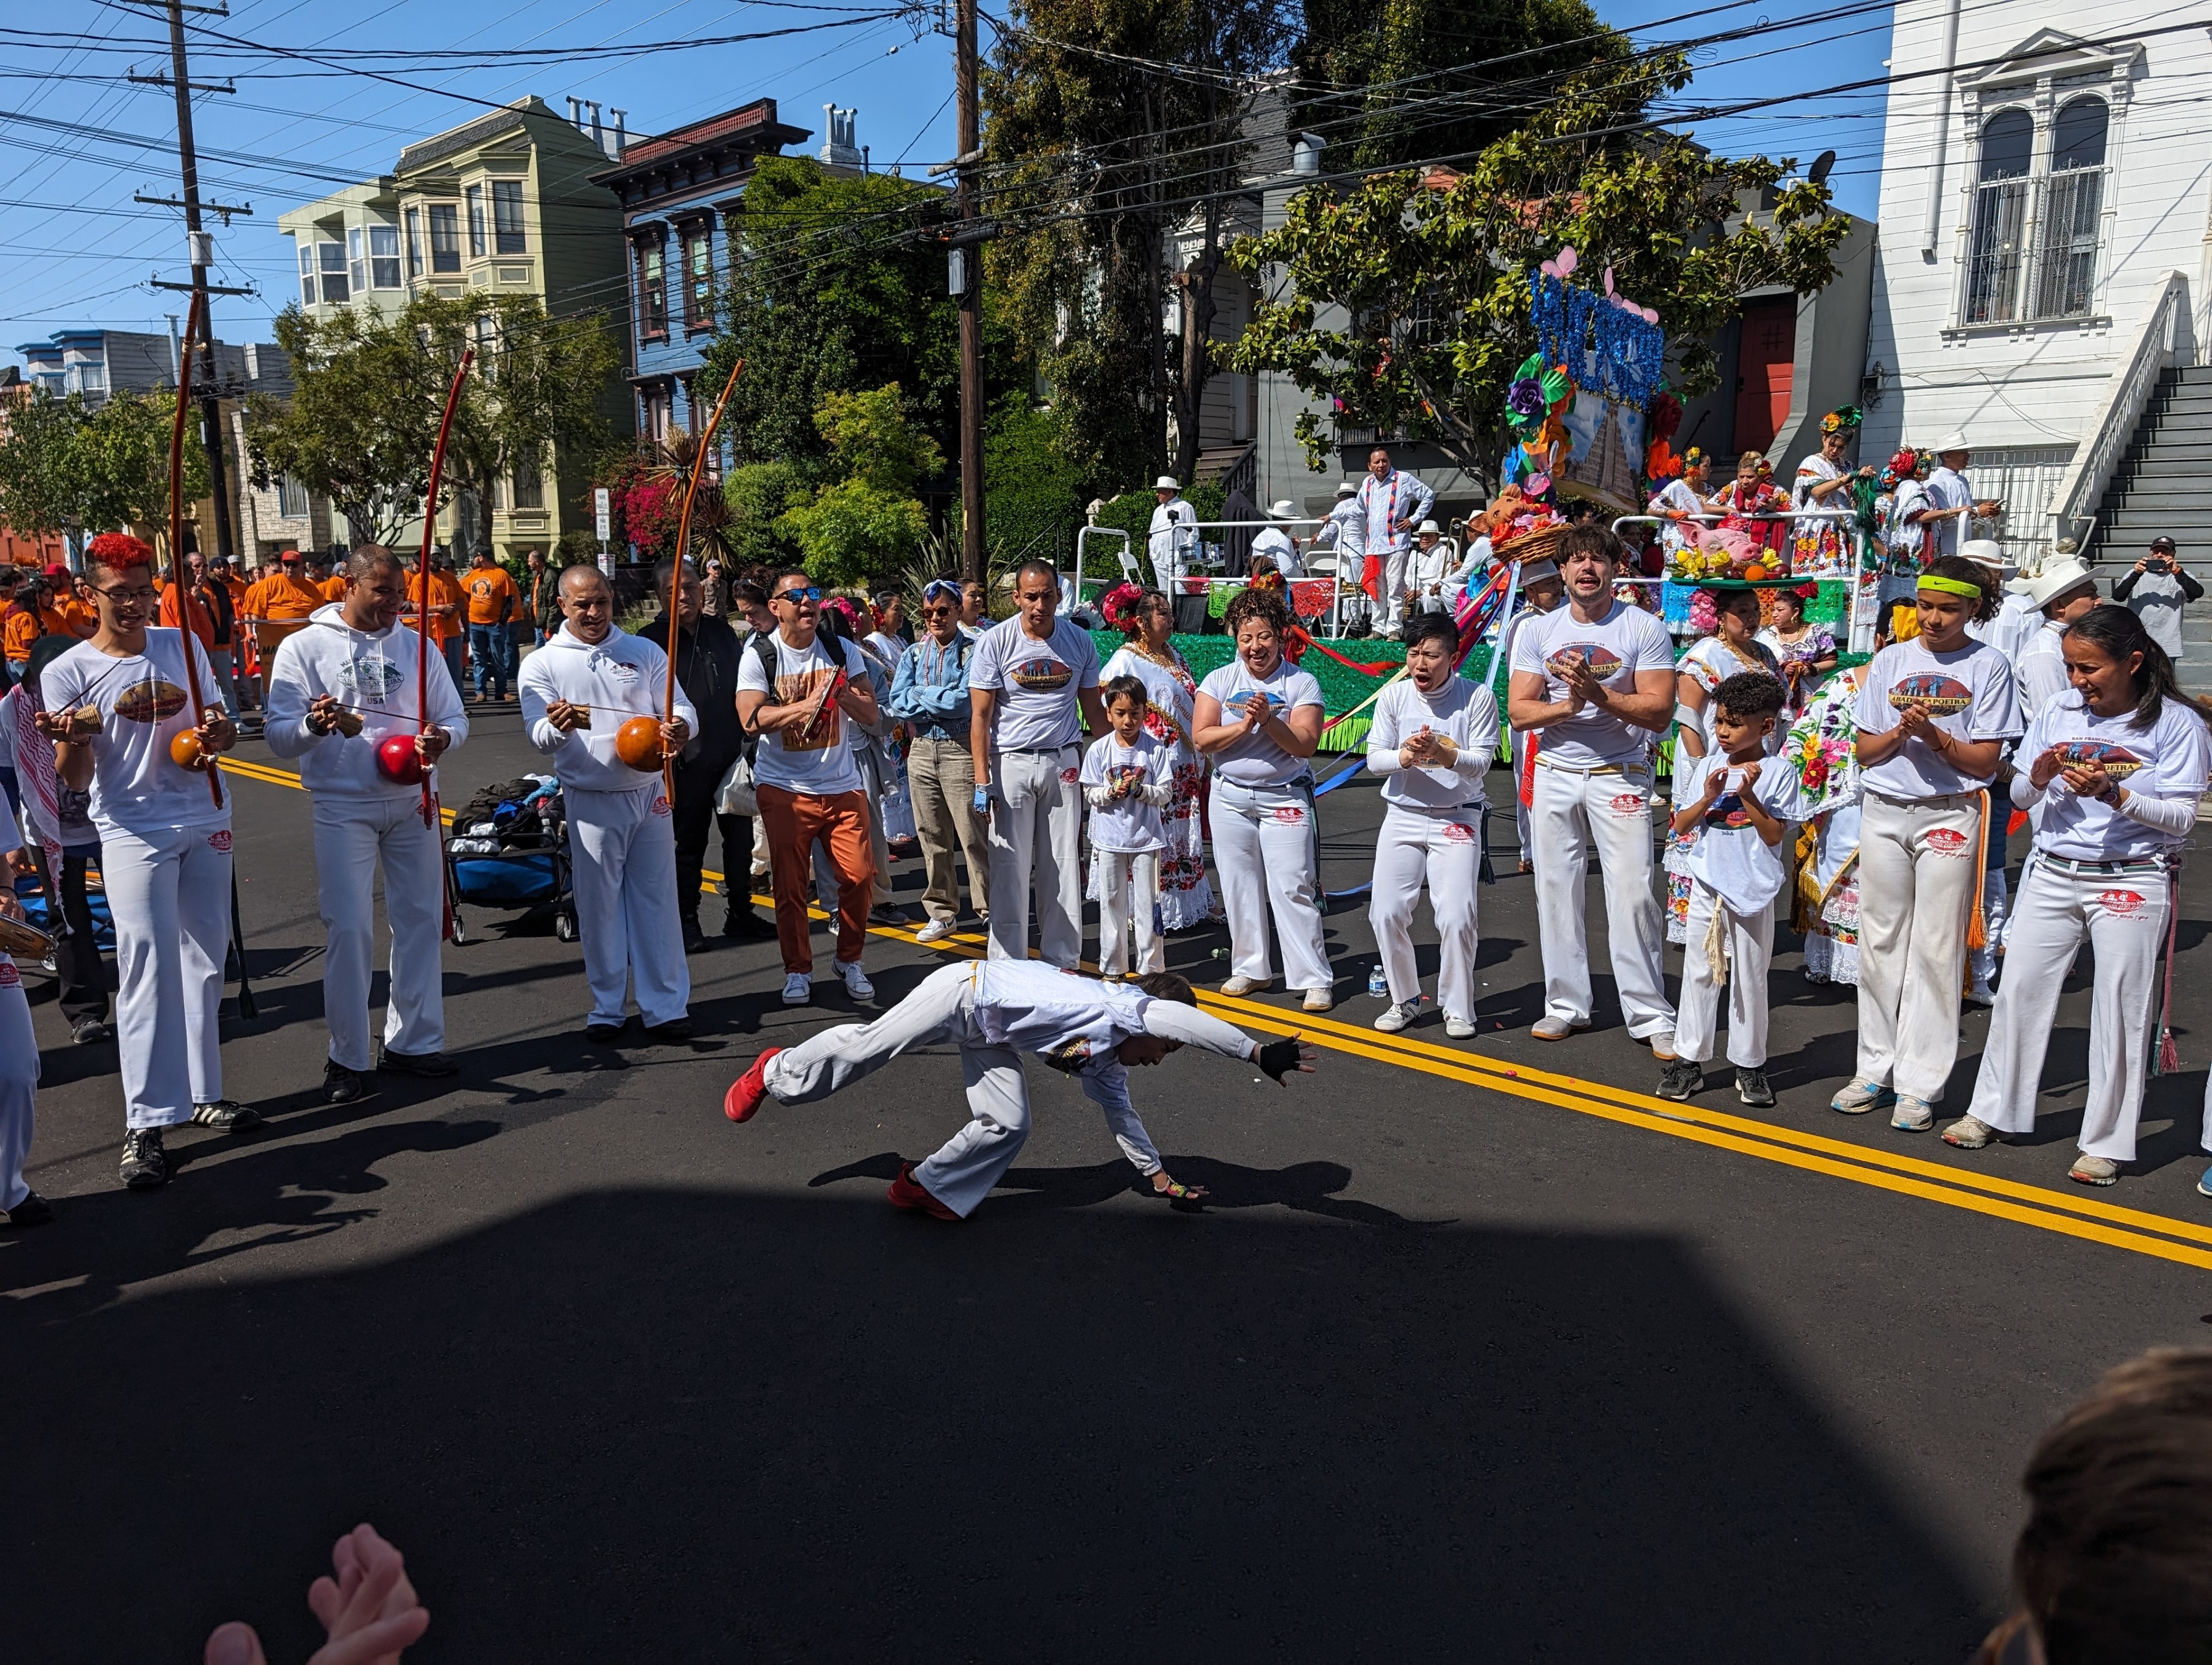 A white-clad boy wearing red shoes cartwheels in a street as white-clad dancers and musicians play around him in a circle.